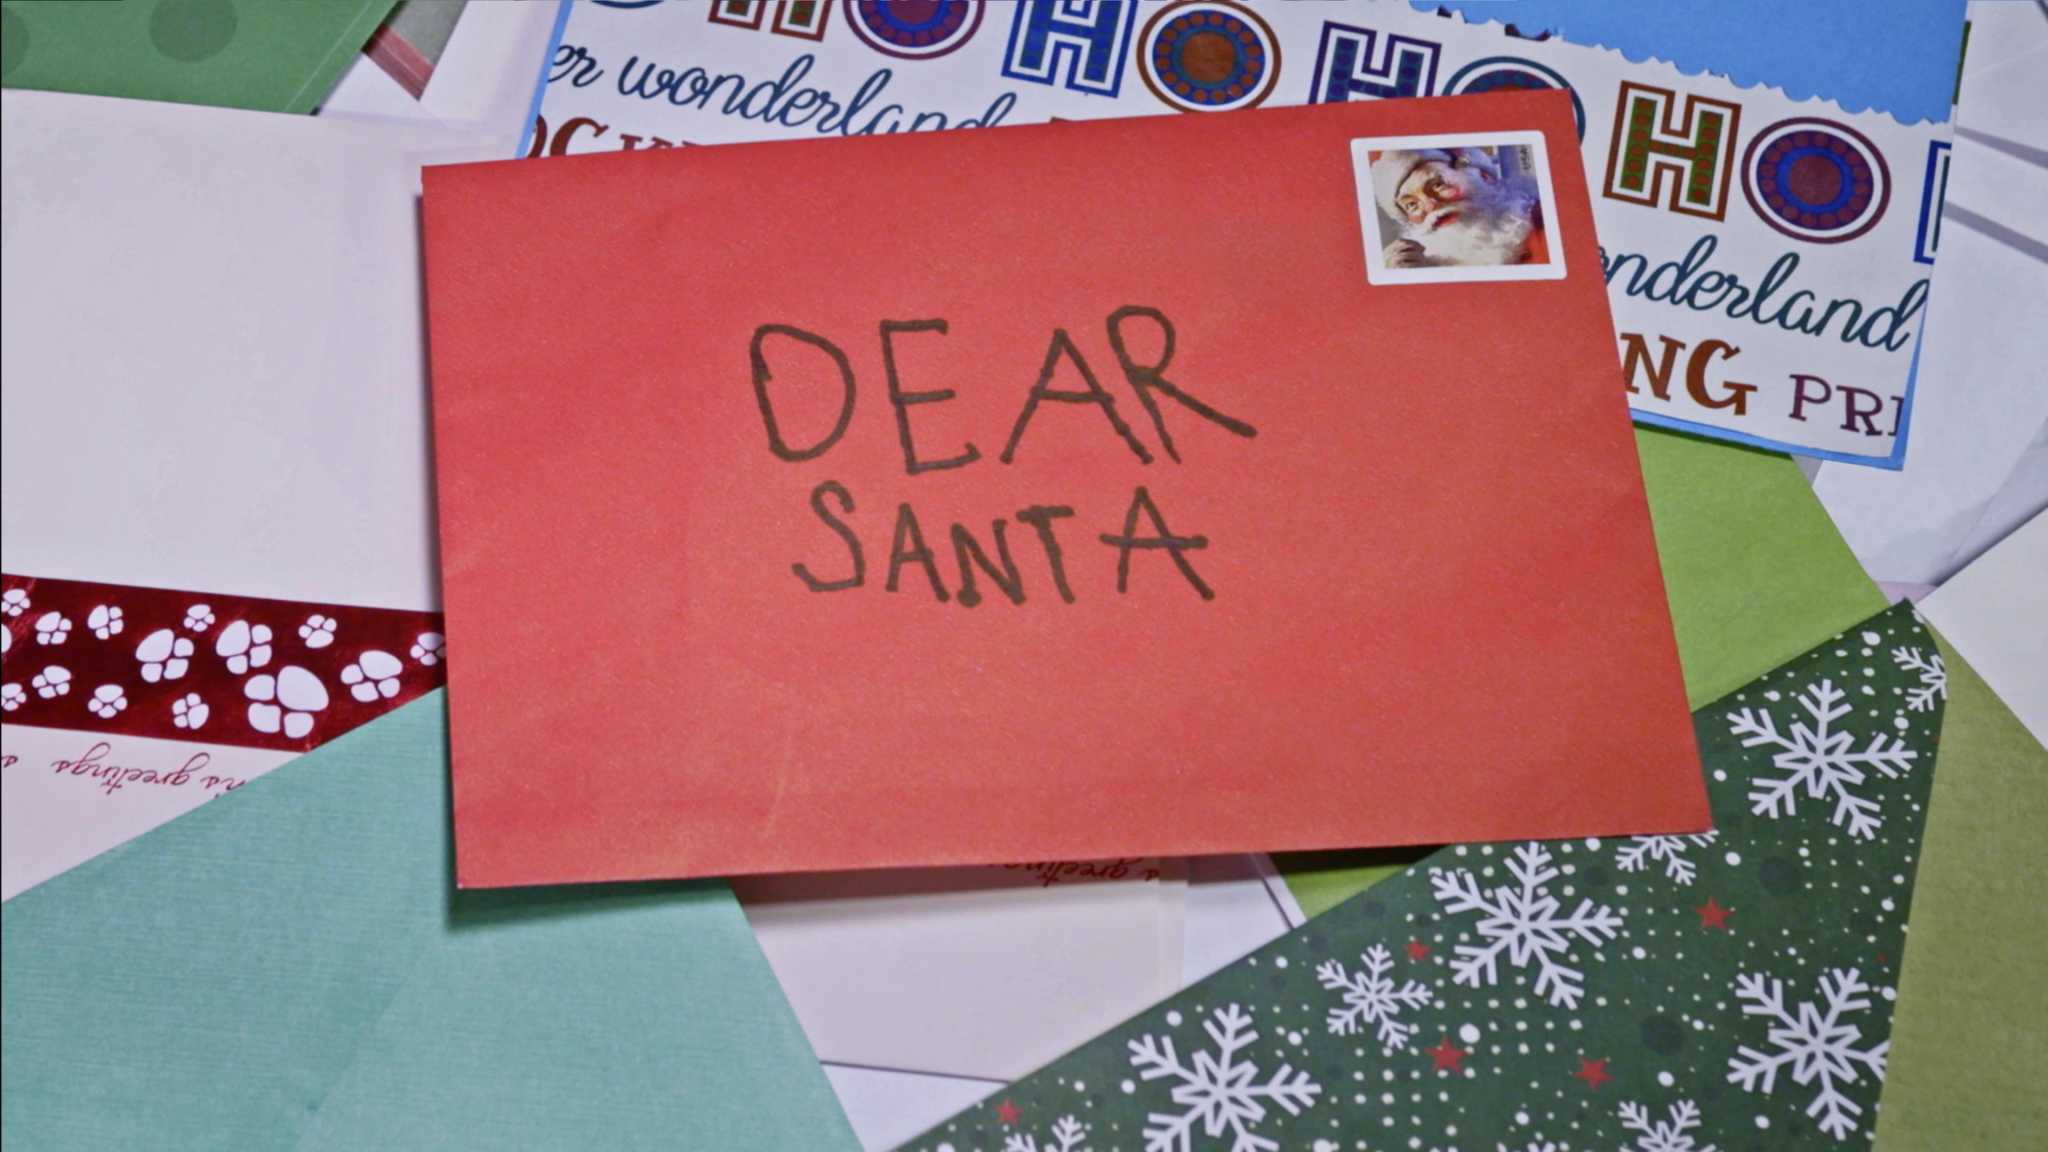 Here is how to send St. Nick a letter or give him a hand on gift duty this holiday season